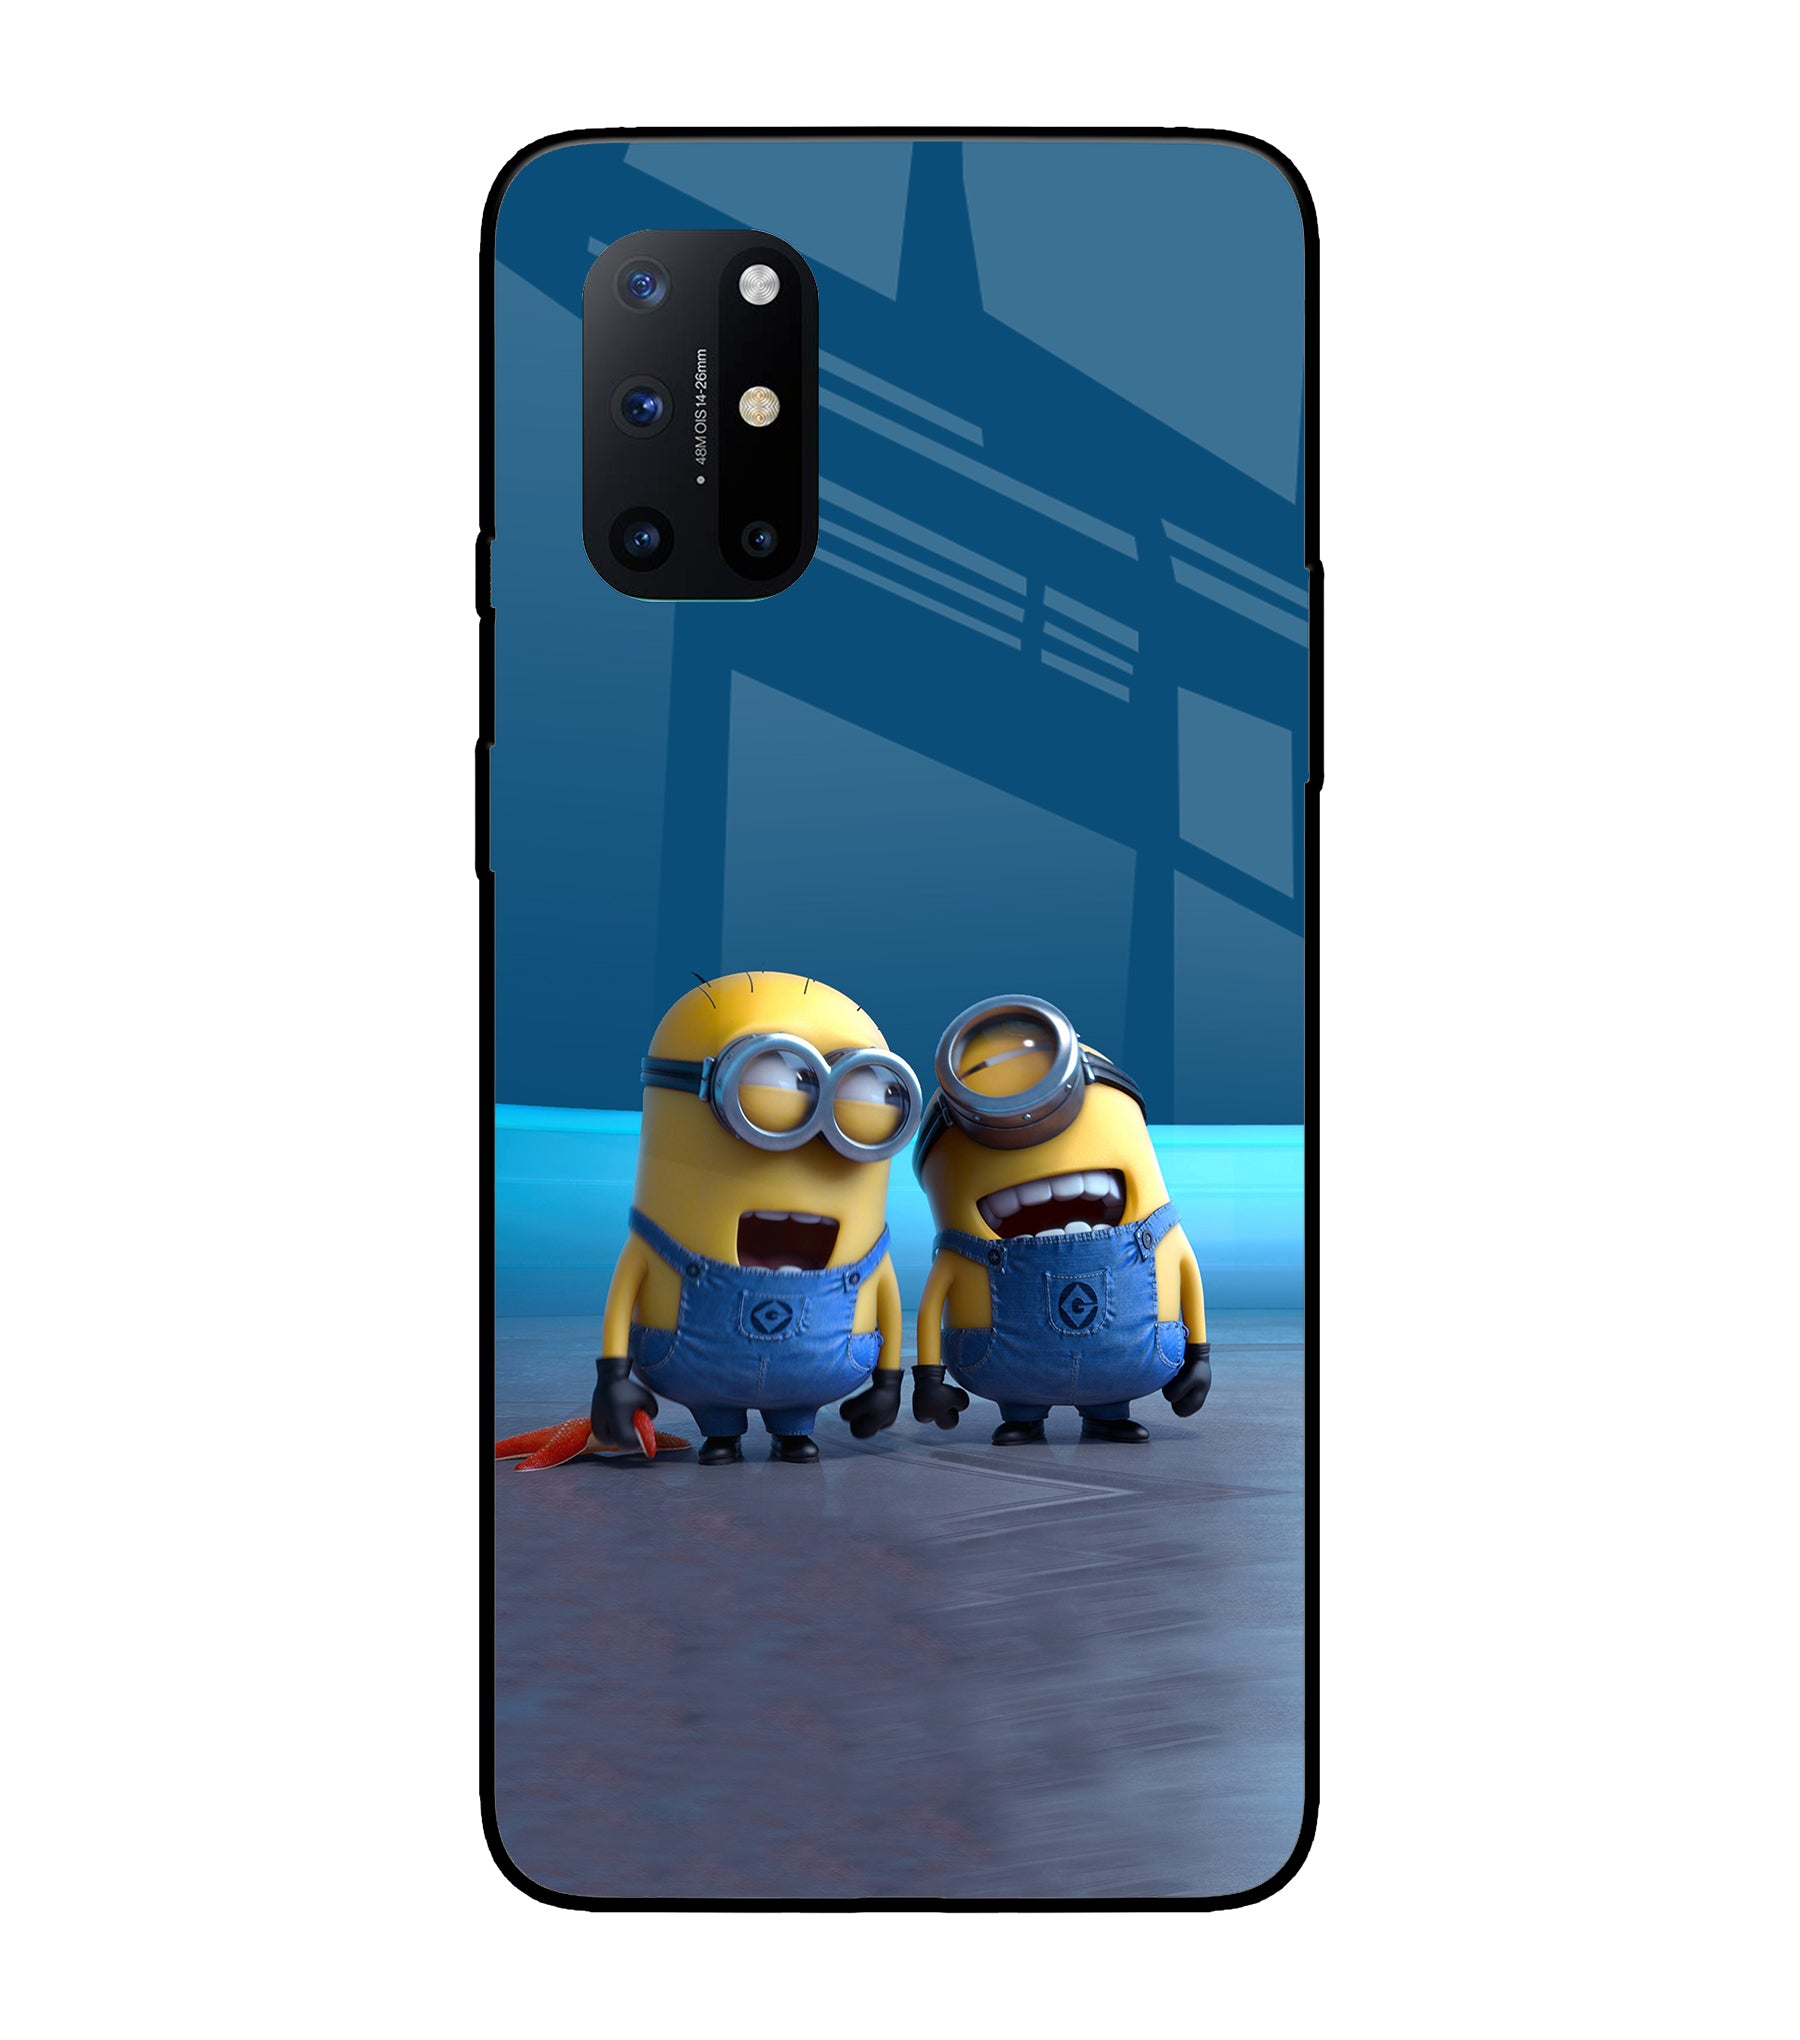 Minion Laughing Oneplus 8T Glass Cover